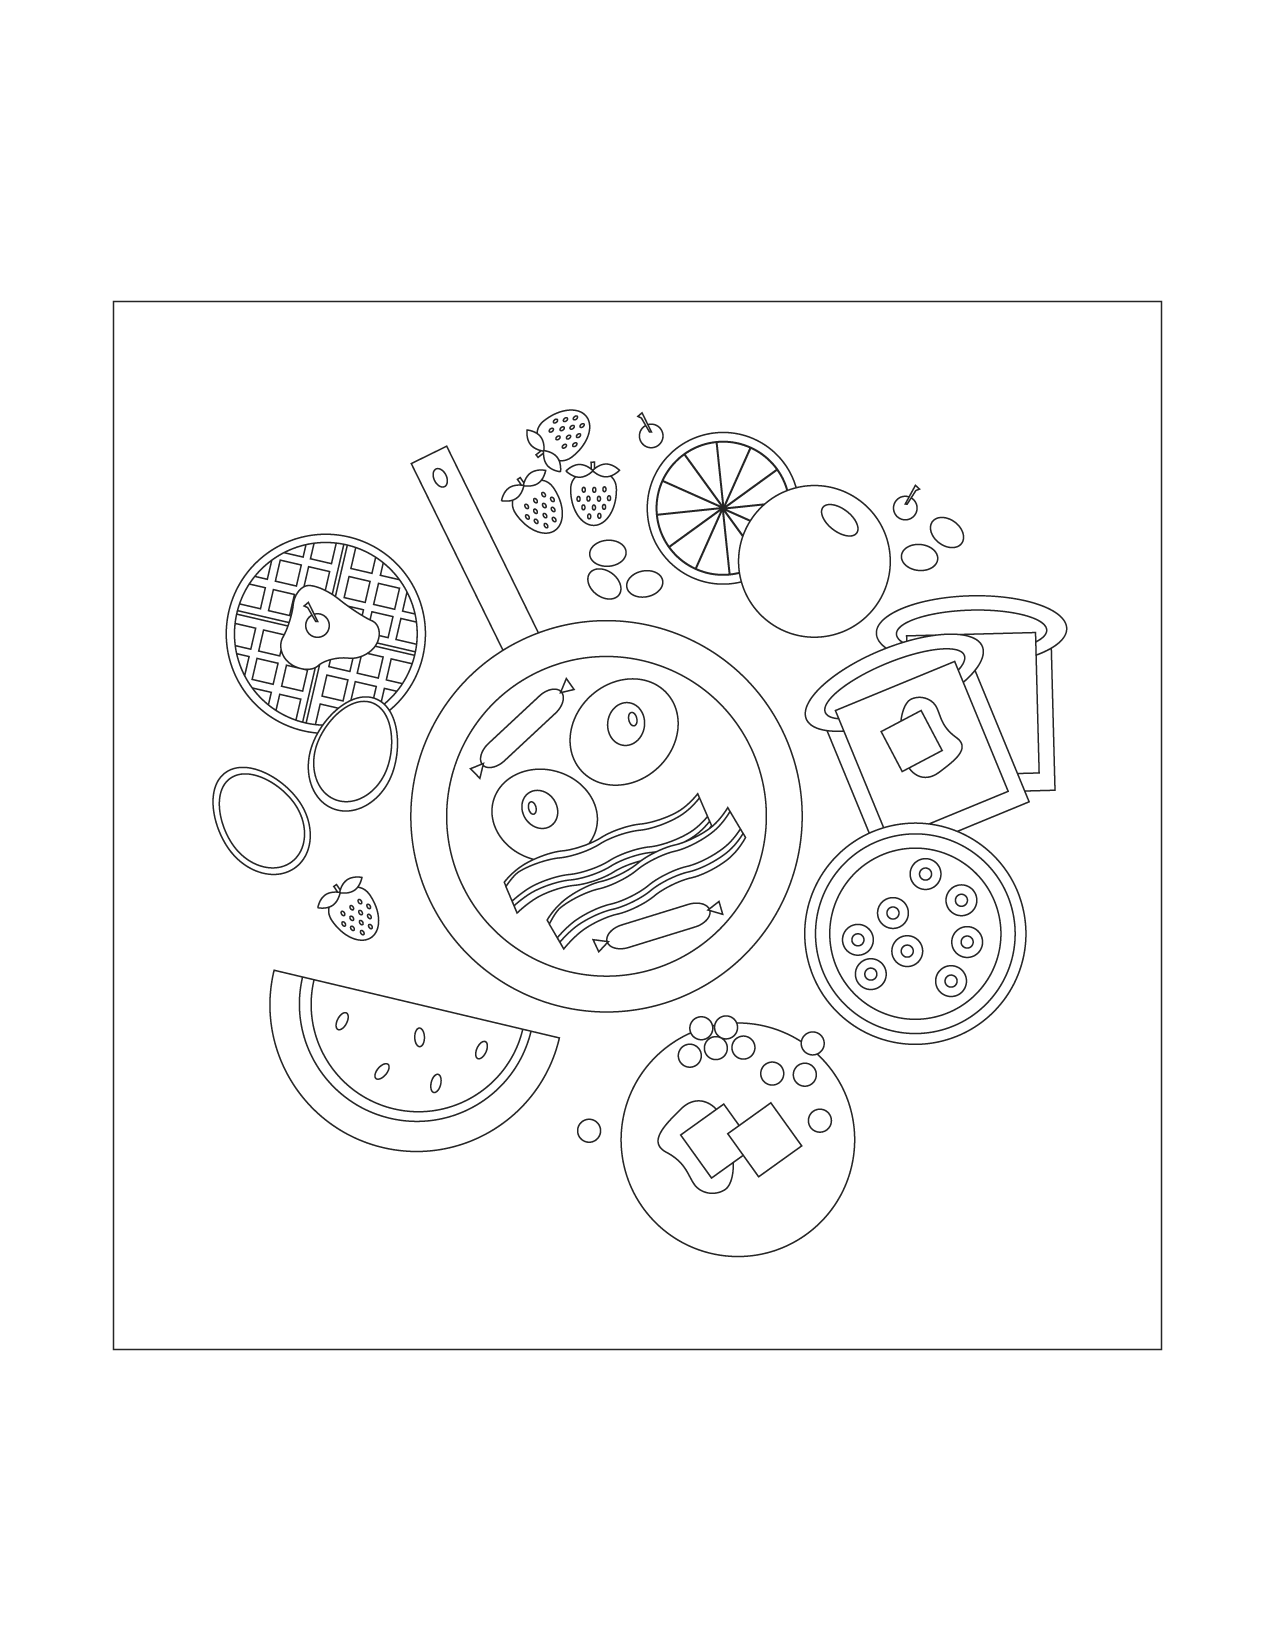 Breakfast Foods Coloring Page